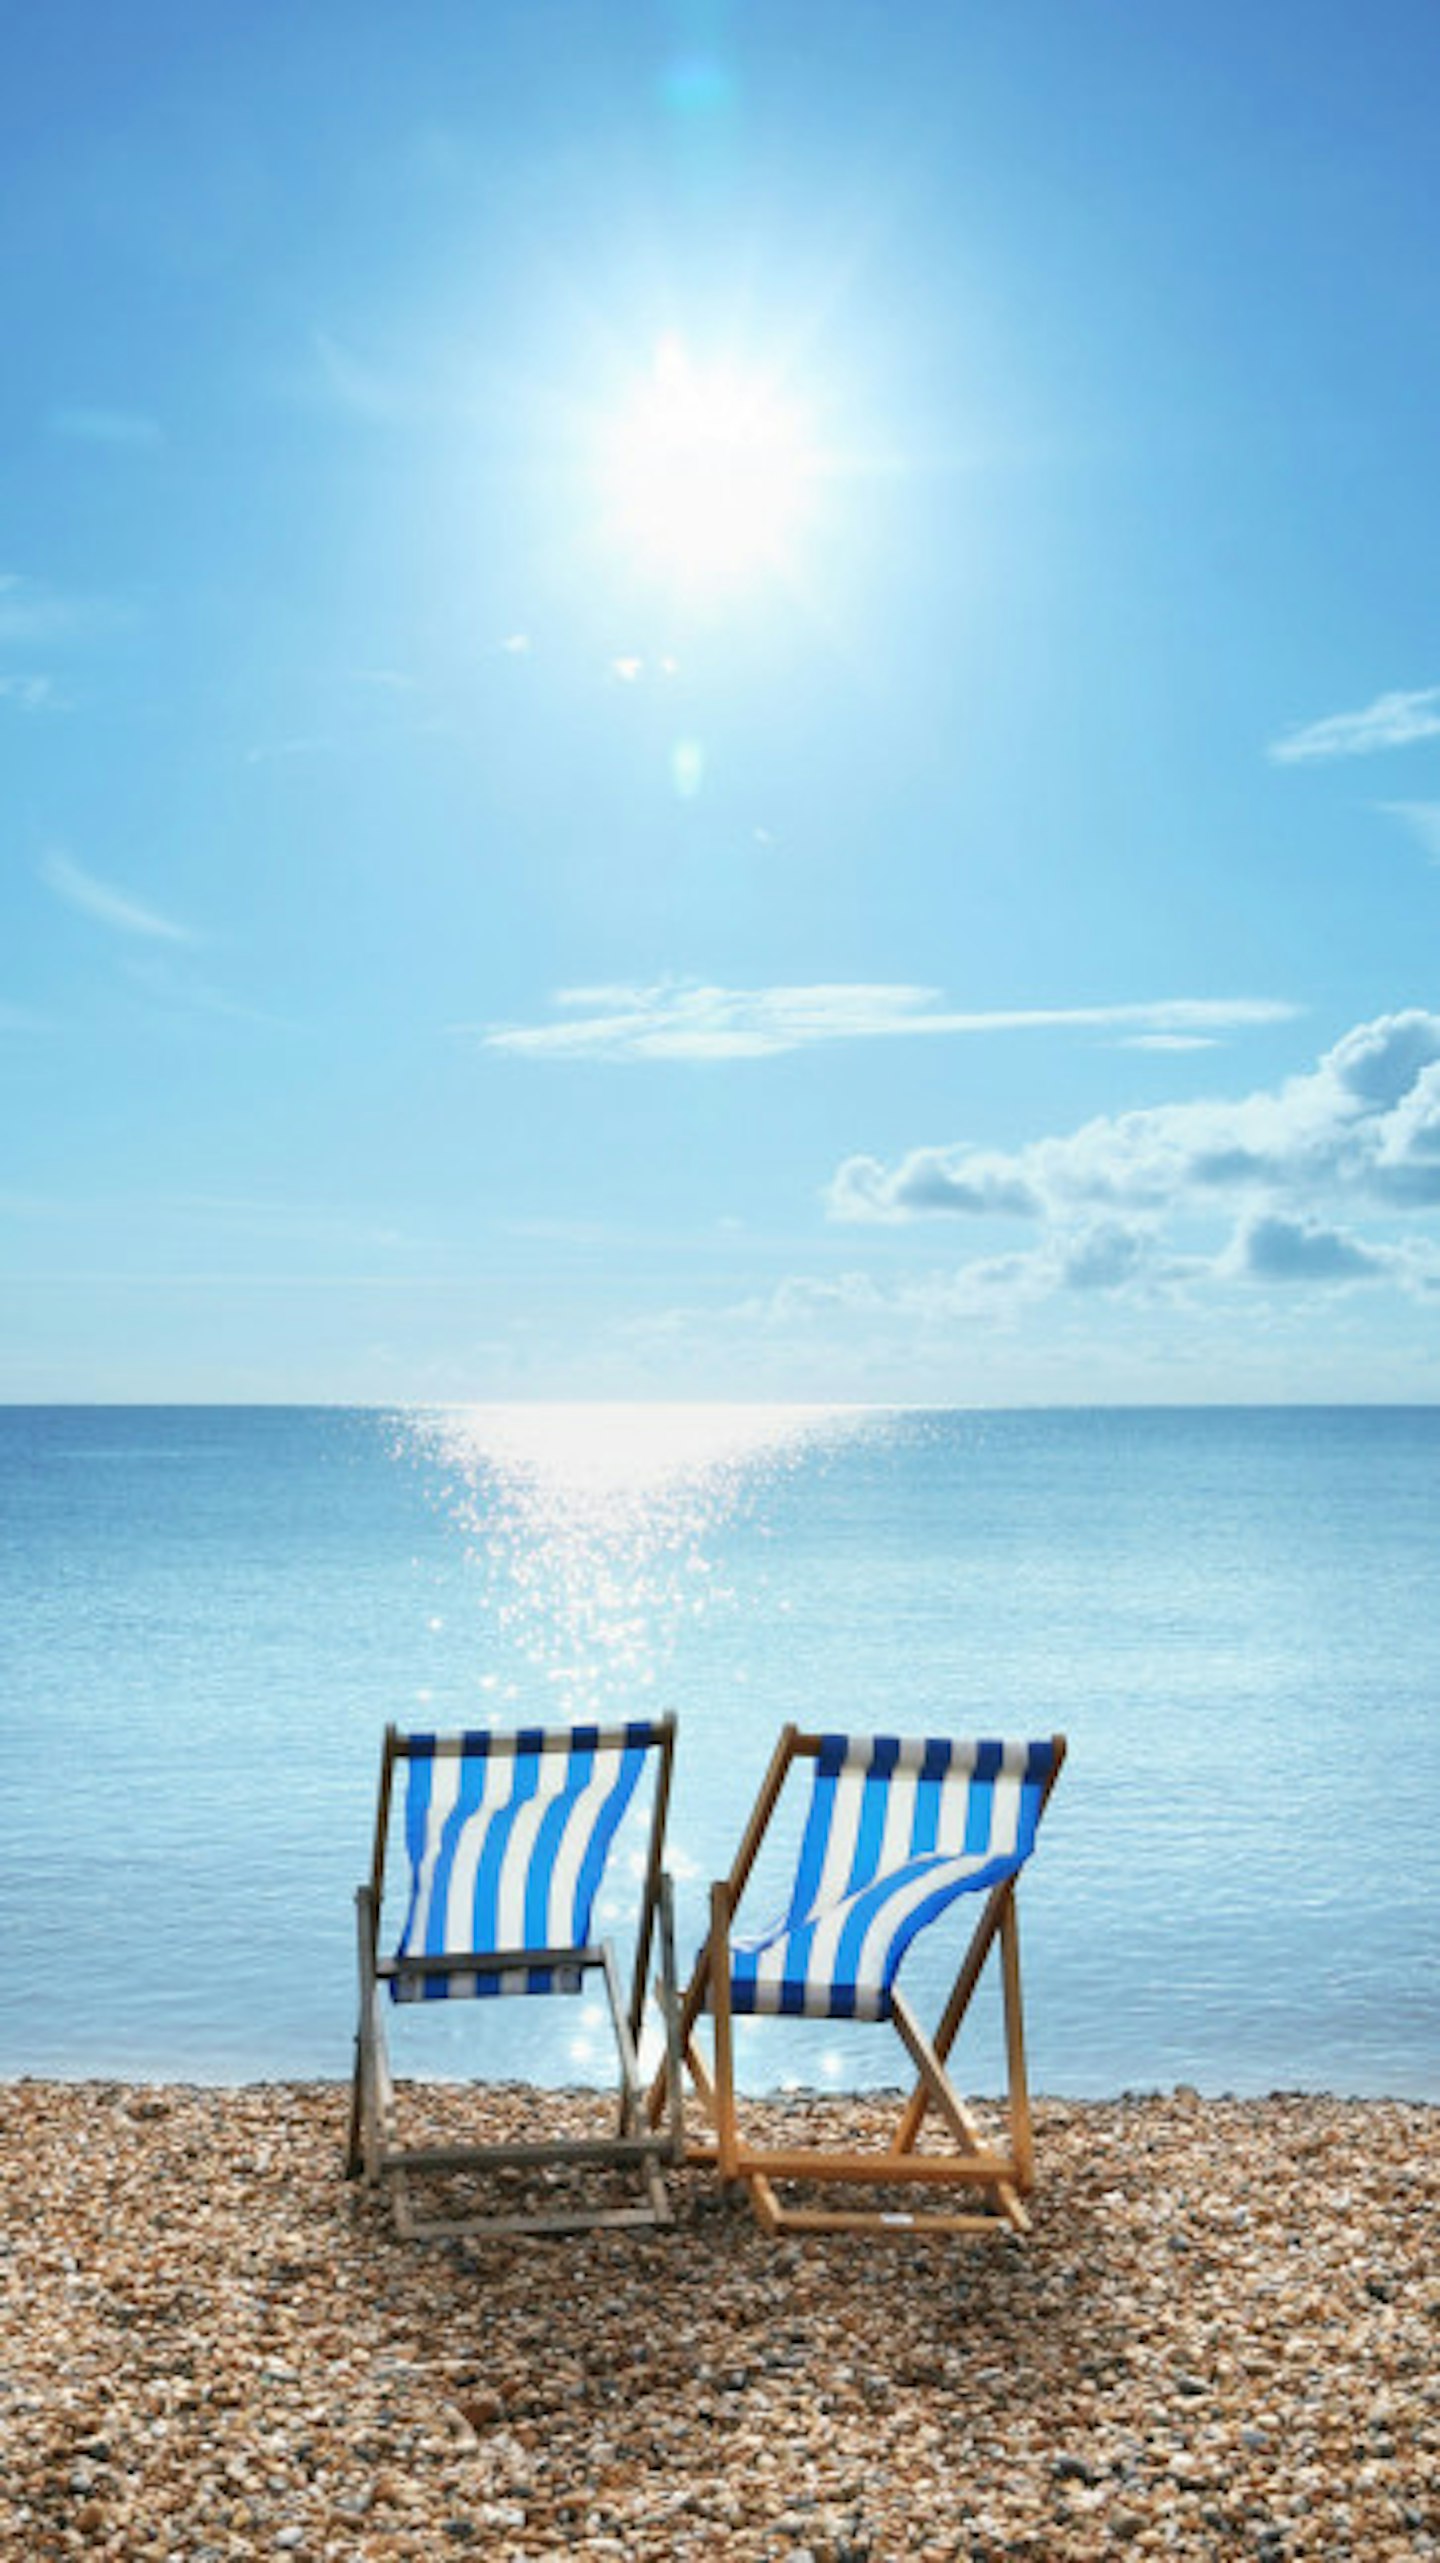 It's time to pull up a deckchair on Brighton beach (stock image)